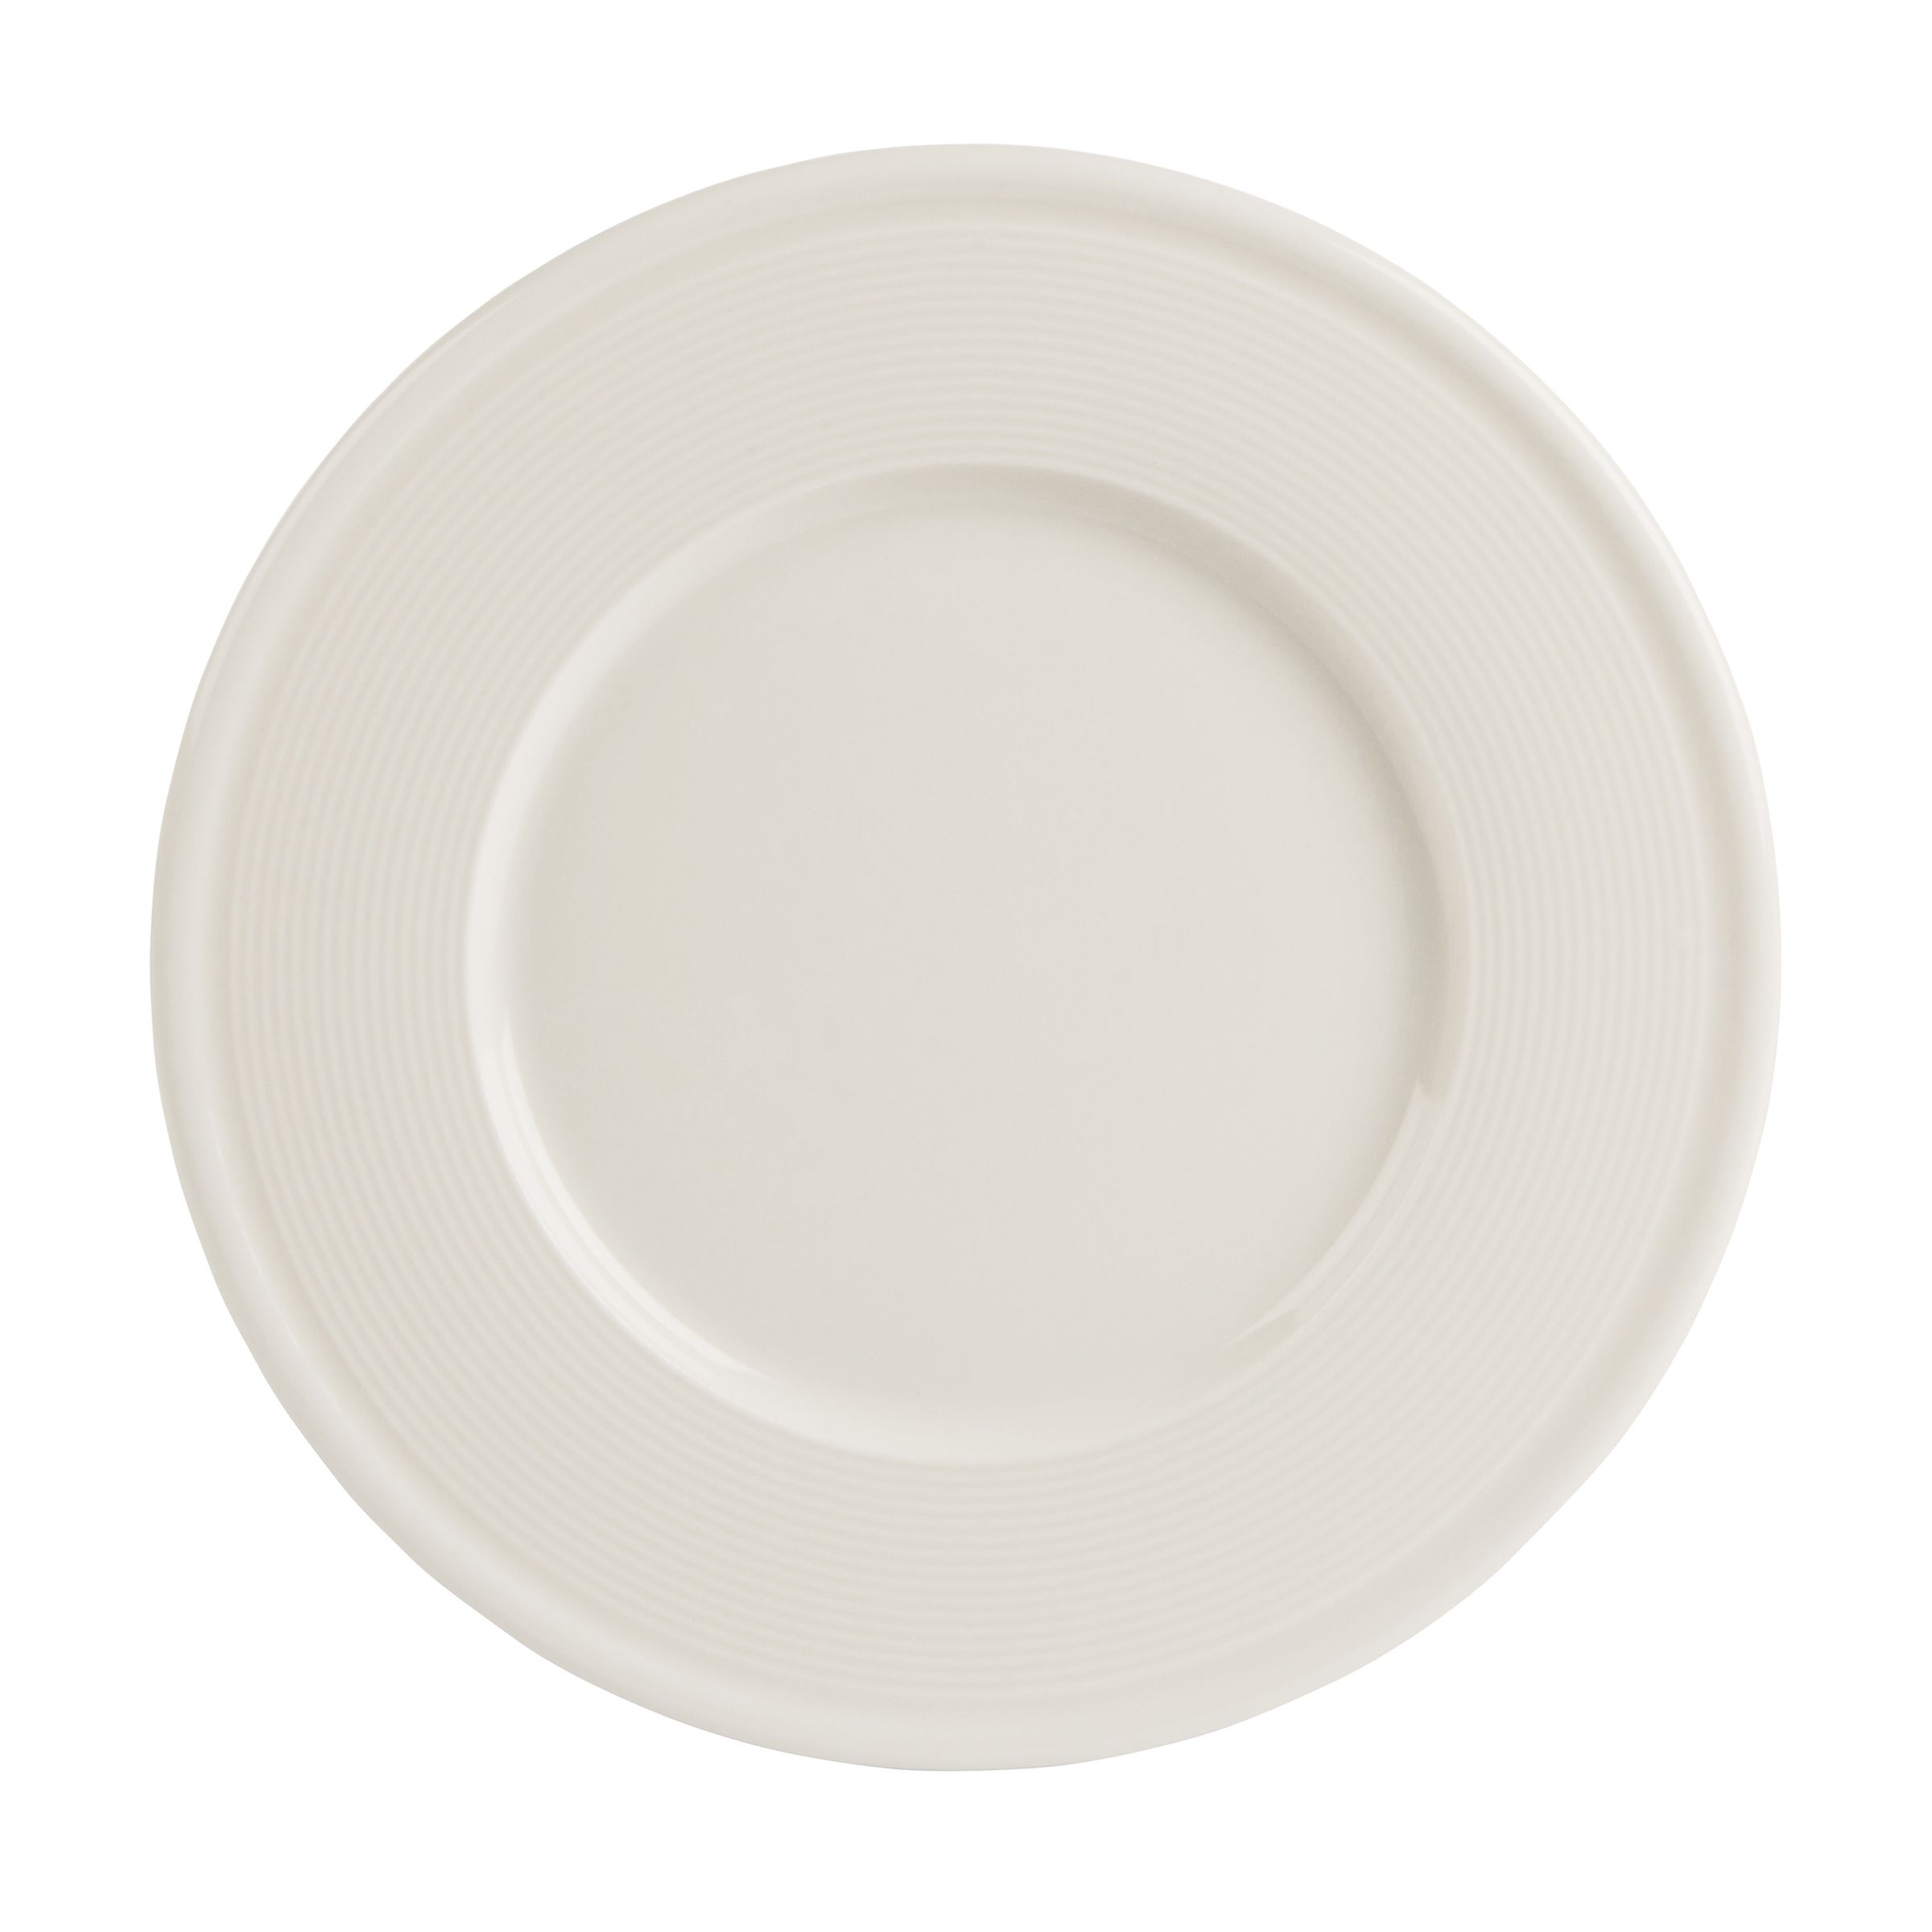 Line Plate 31cm - 185831 (Pack of 6)